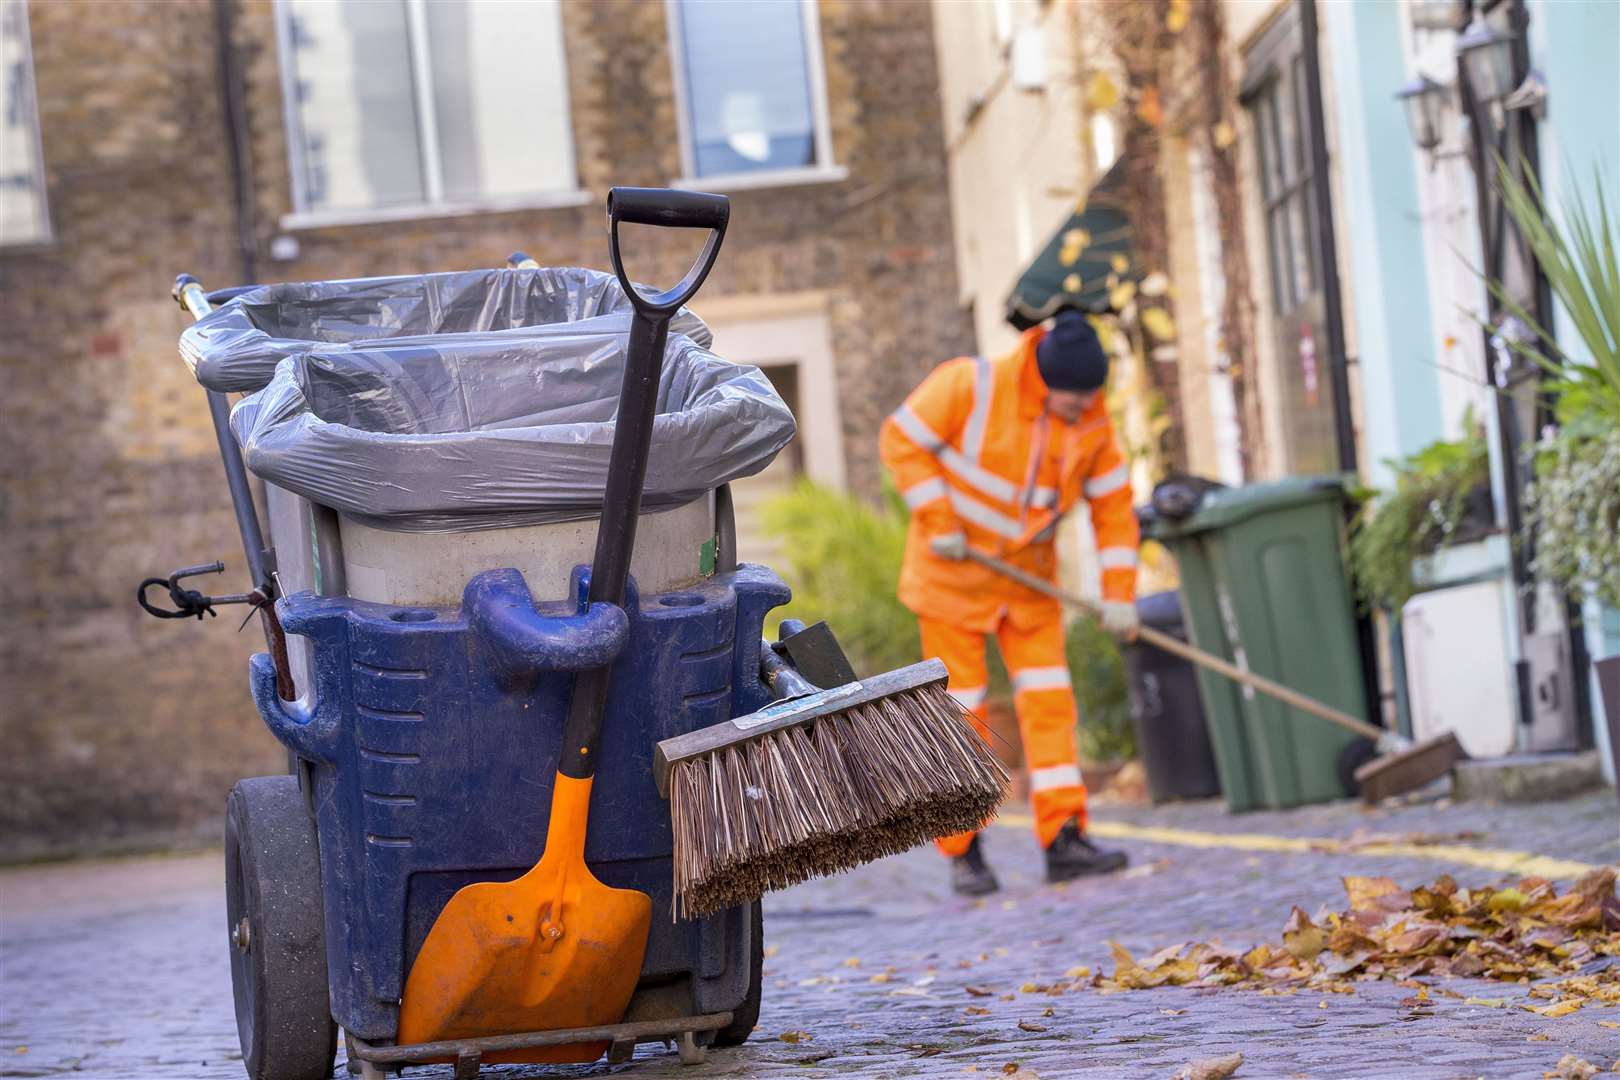 Suez will be taking over the street cleaning contract for Ashford and Swale councils while in Maidstone it will remain in-house. Picture: Paulbox